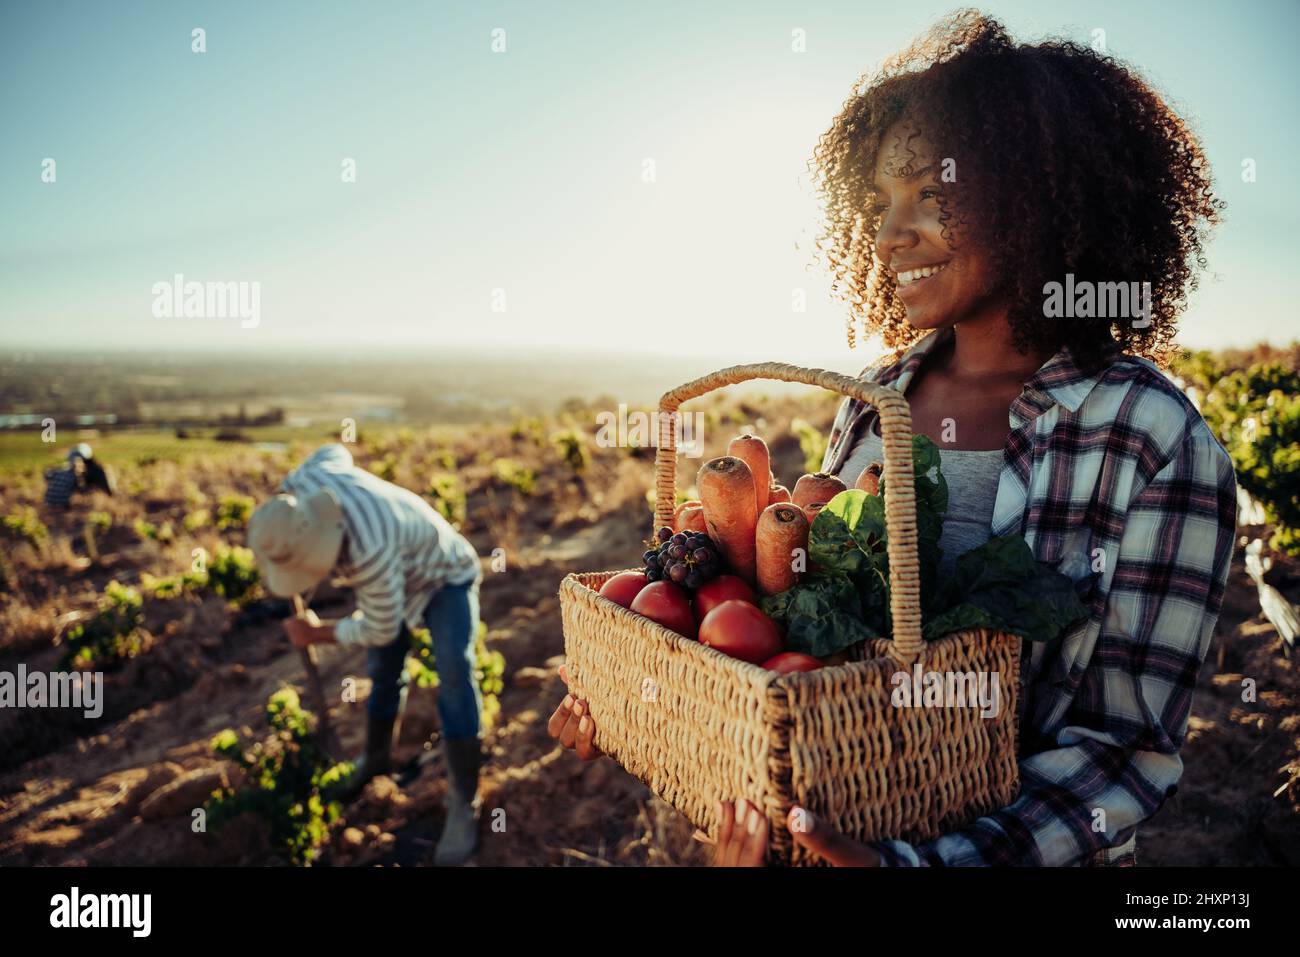 Mixed race female farmer holding vegetable basket while male worker harvests crops  Stock Photo